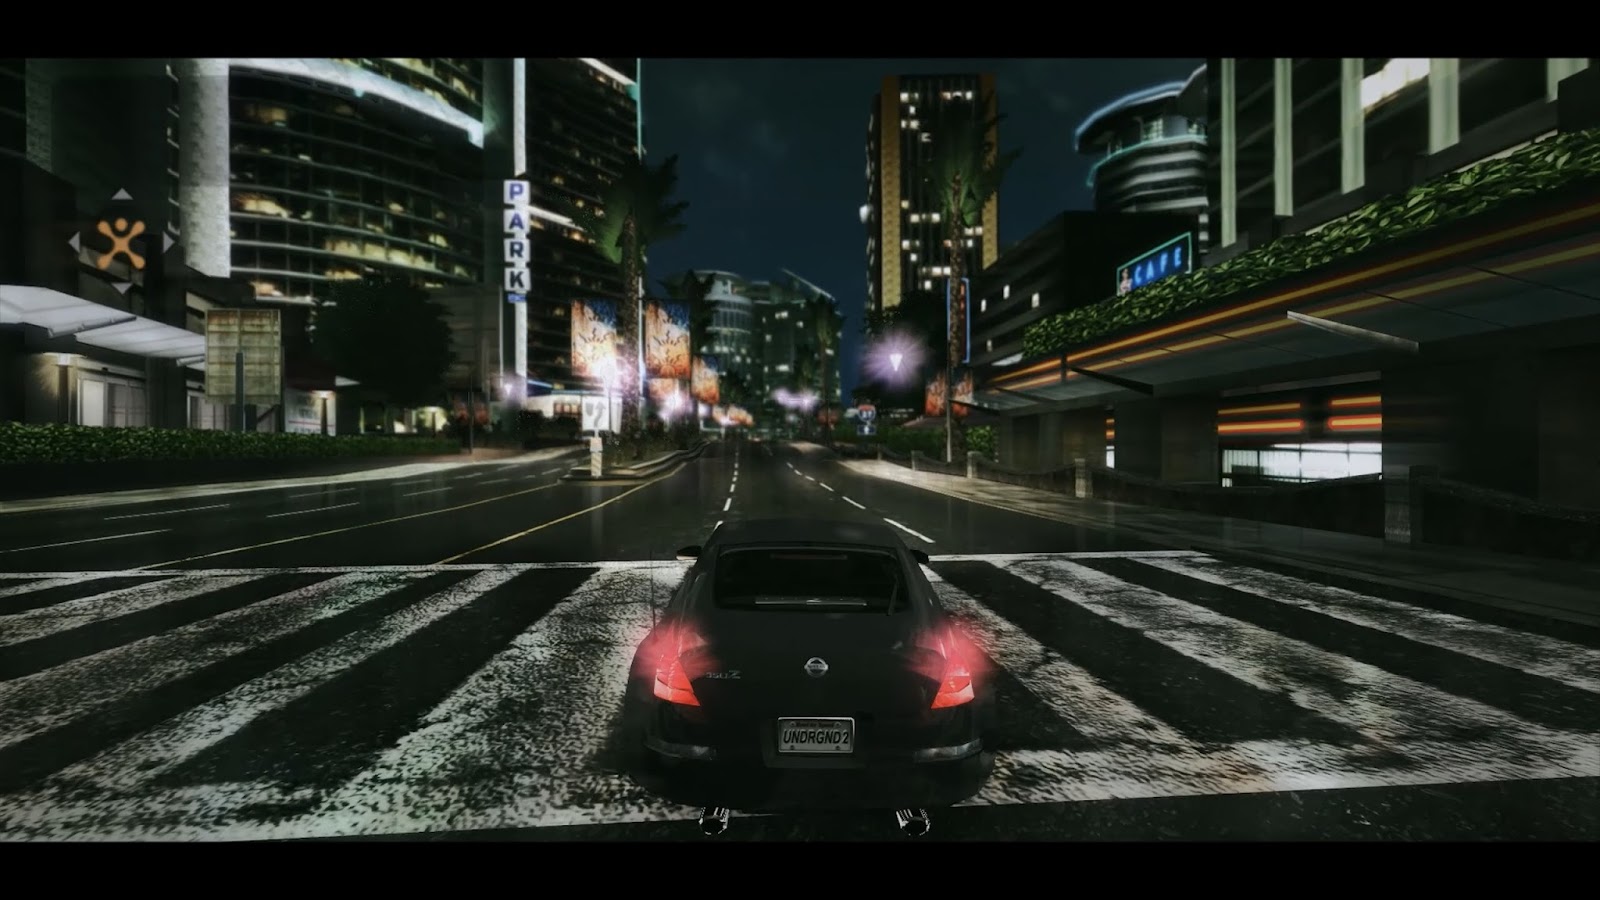 Double click inside the need for speed. / Download Game Need